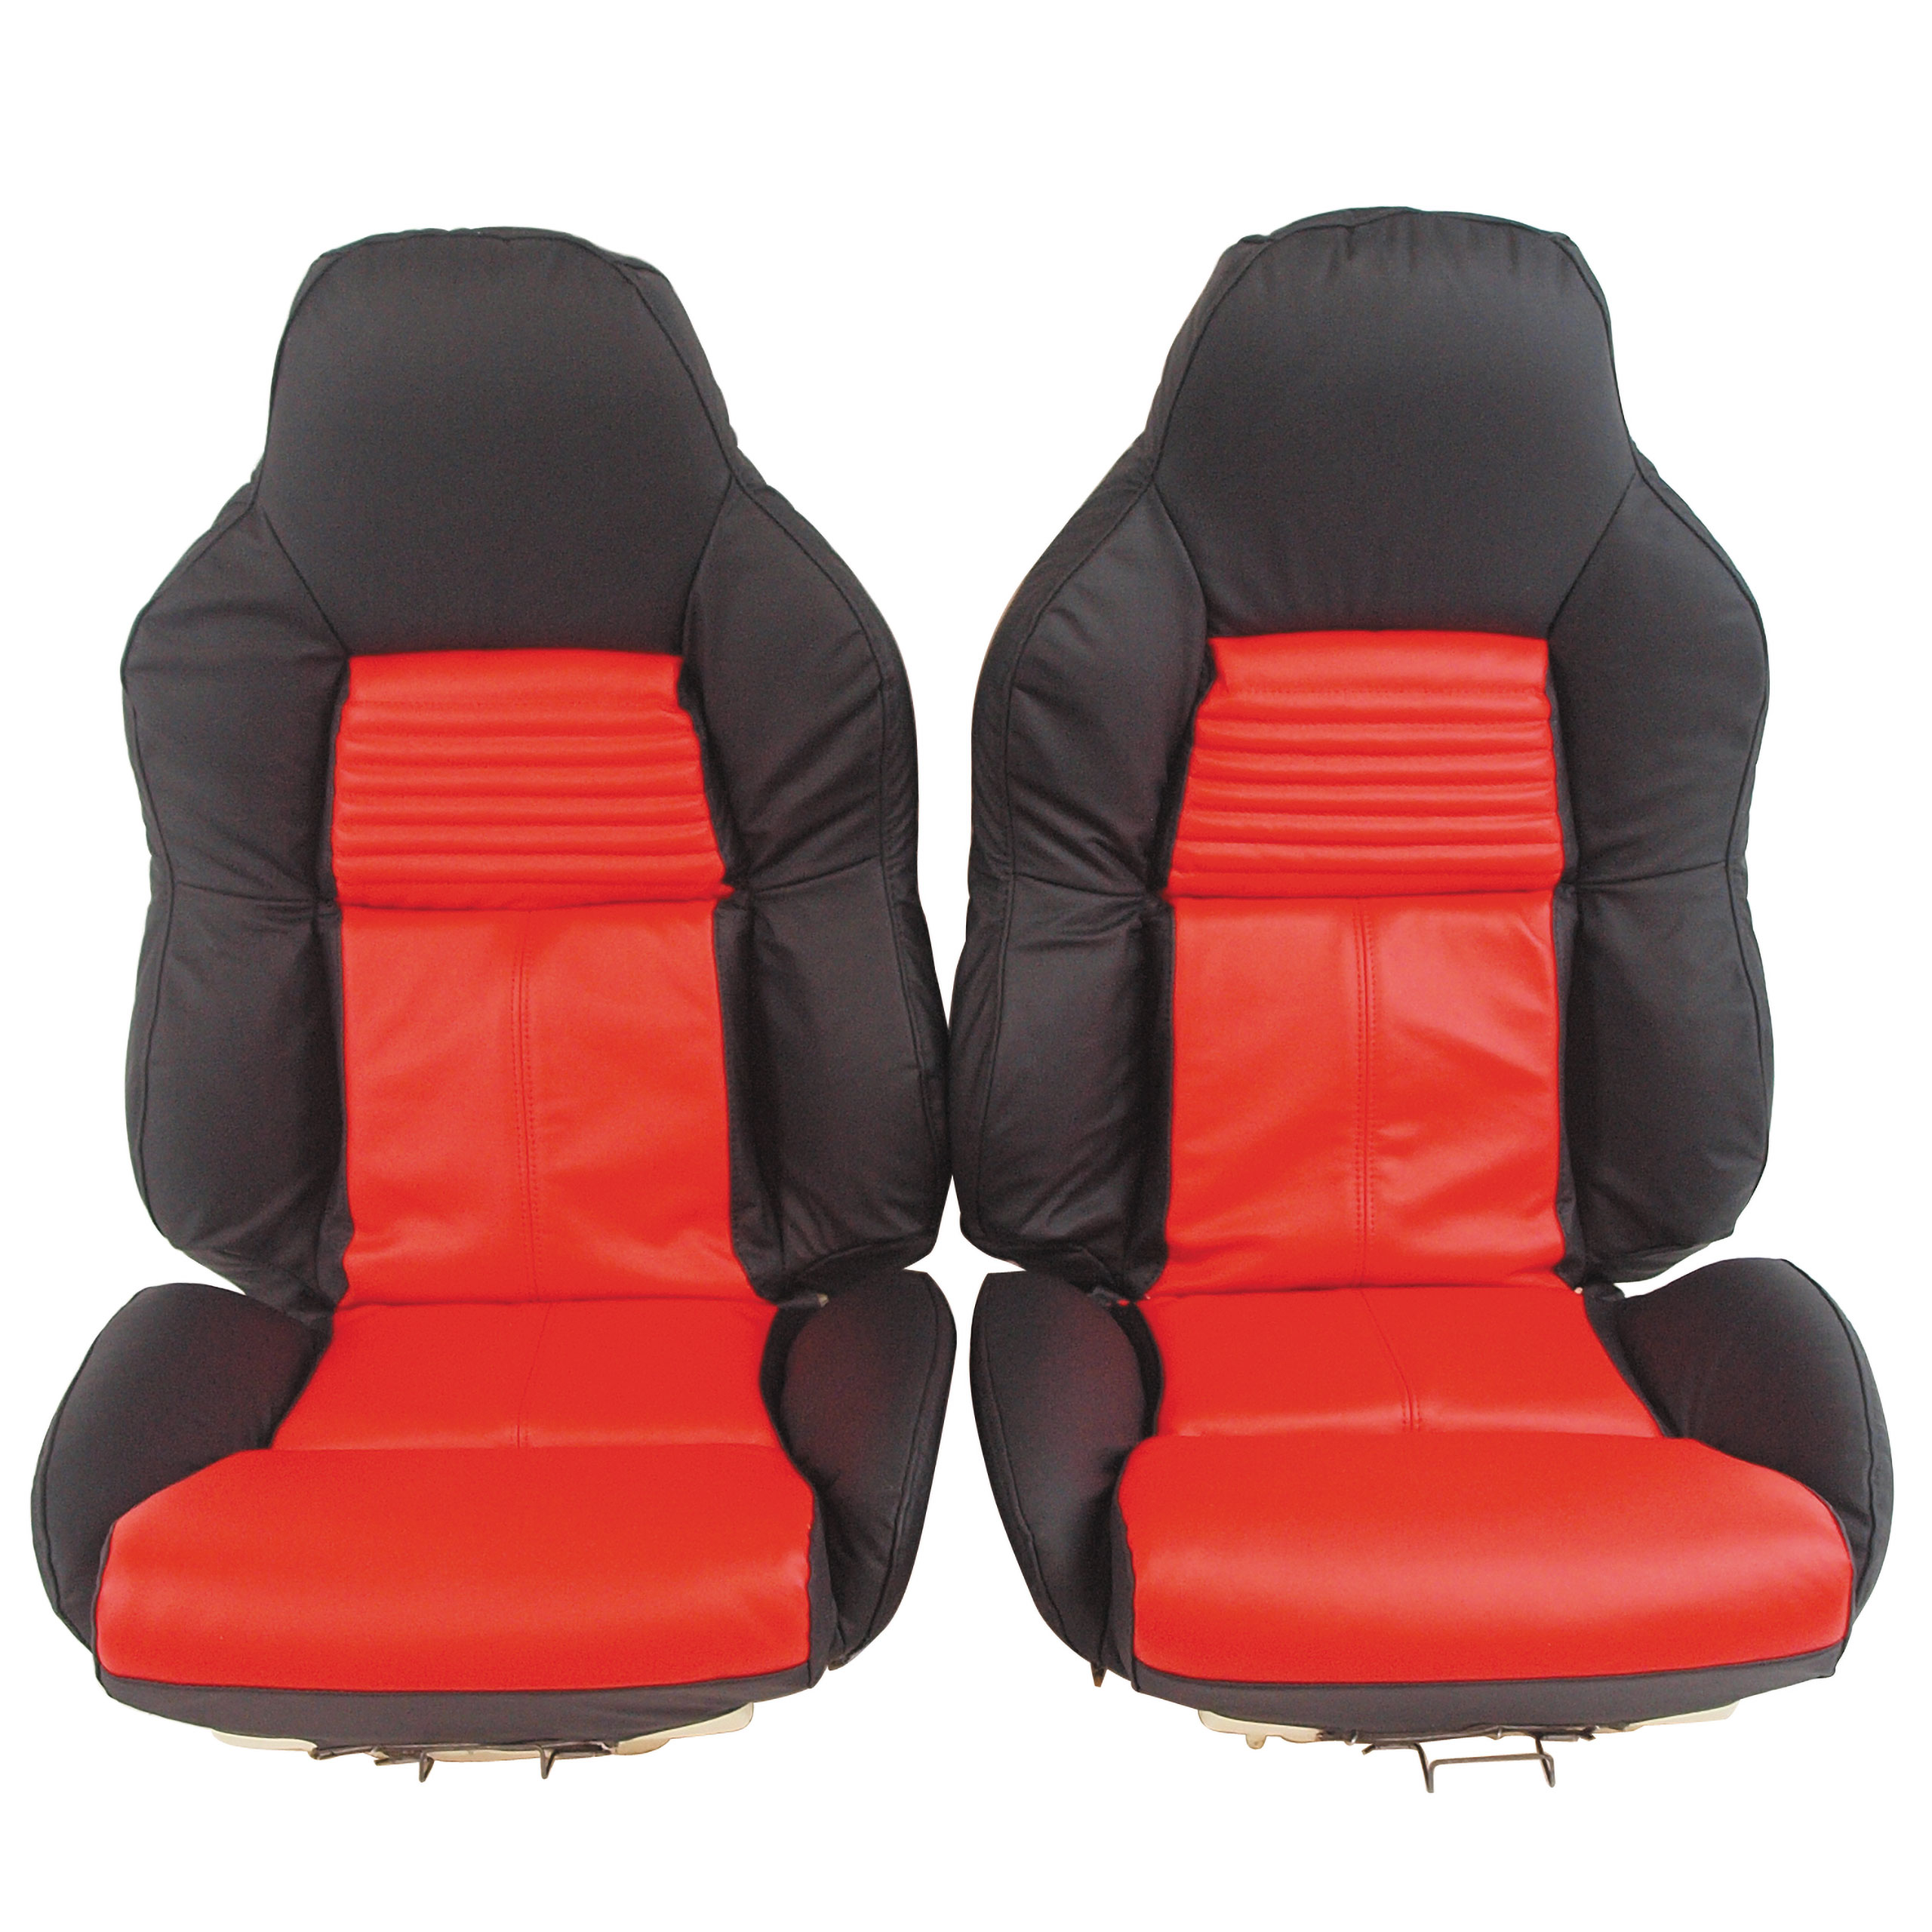 1994-1996 C4 Corvette Mounted 100% Leather Standard Seat Covers - Black /Red 2-Tone